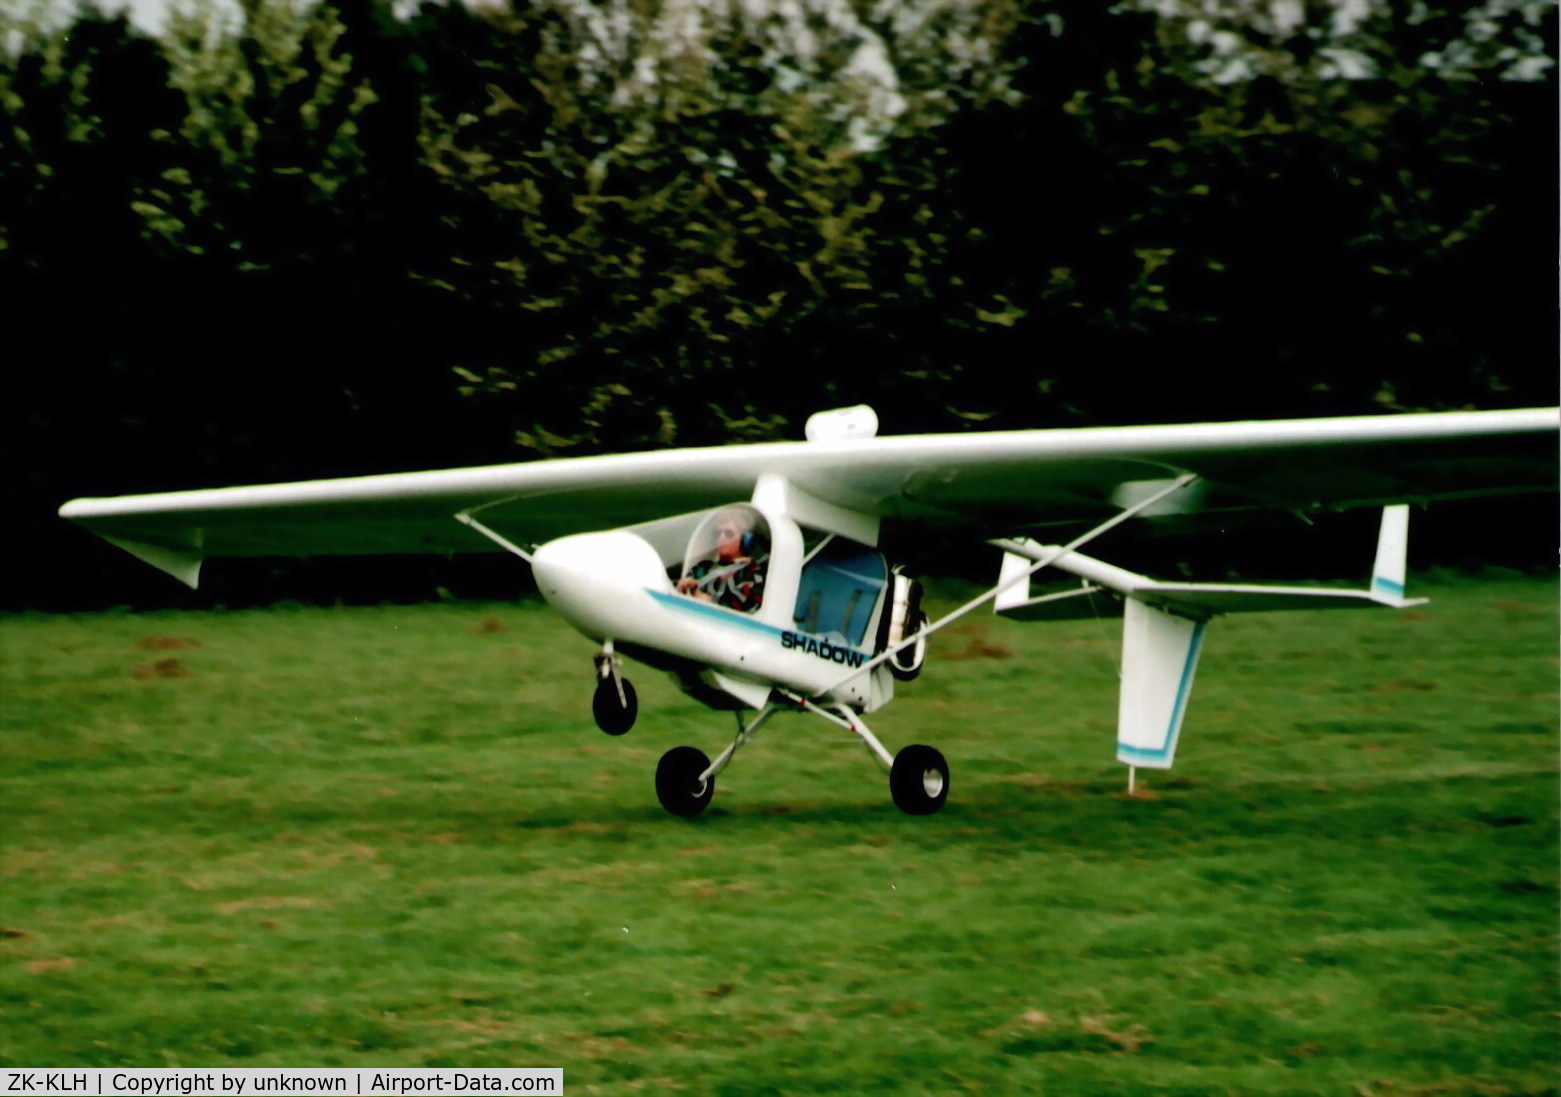 ZK-KLH, 1989 CFM Shadow Series BD C/N 060/MAANZ/417, One of two Shadow B-D microlights built in Southland, New Zealand, from imported CFM kitsets (ZK-KLH first to fly - Feb 1989)